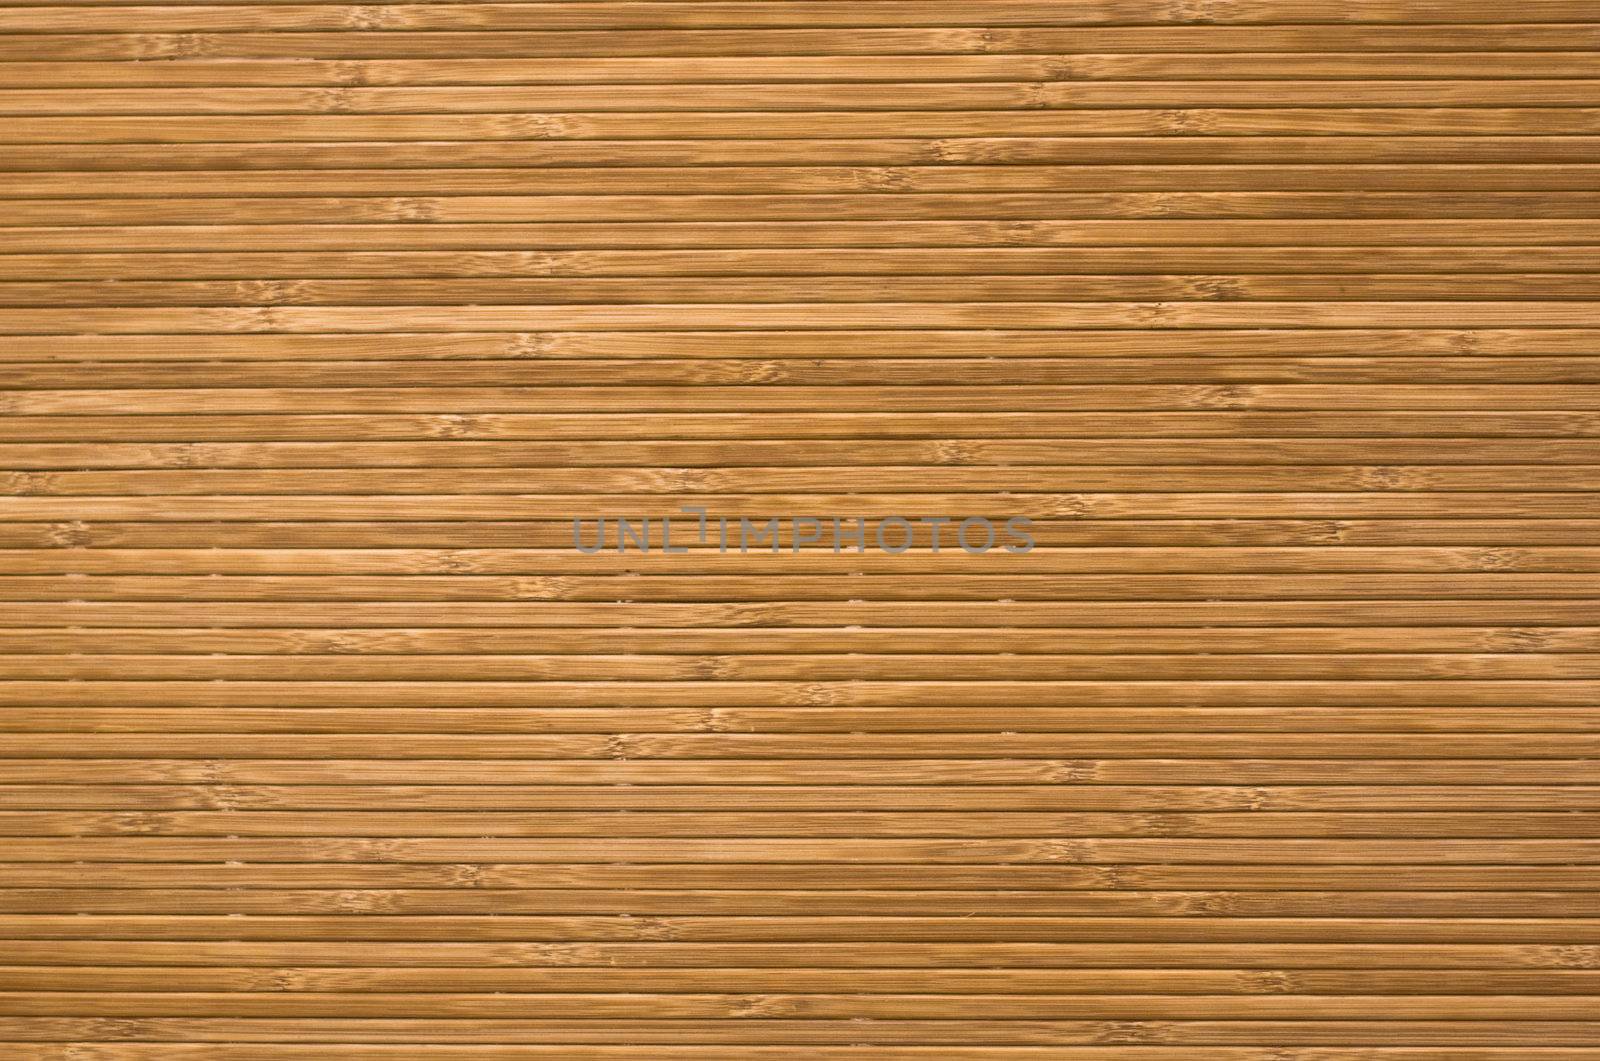 Pressed bamboo texture for background